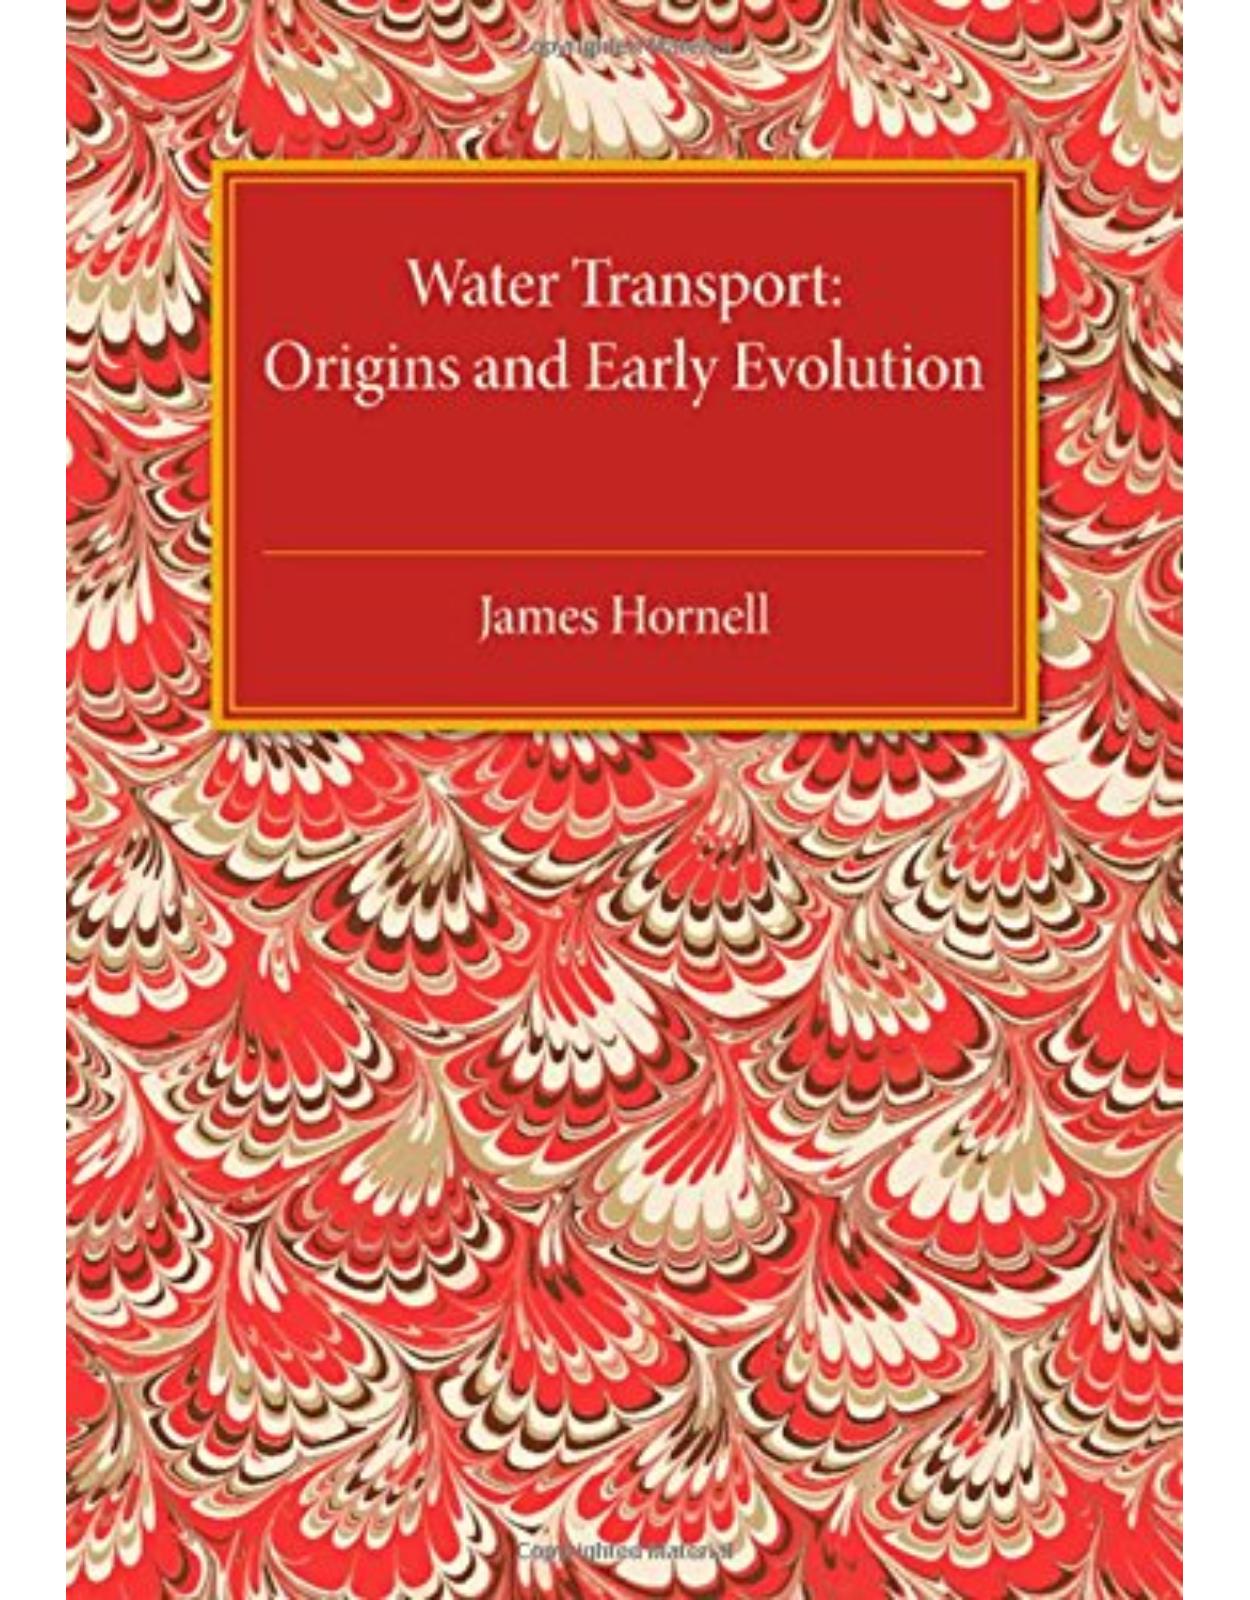 Water Transport: Origins and Early Evolution